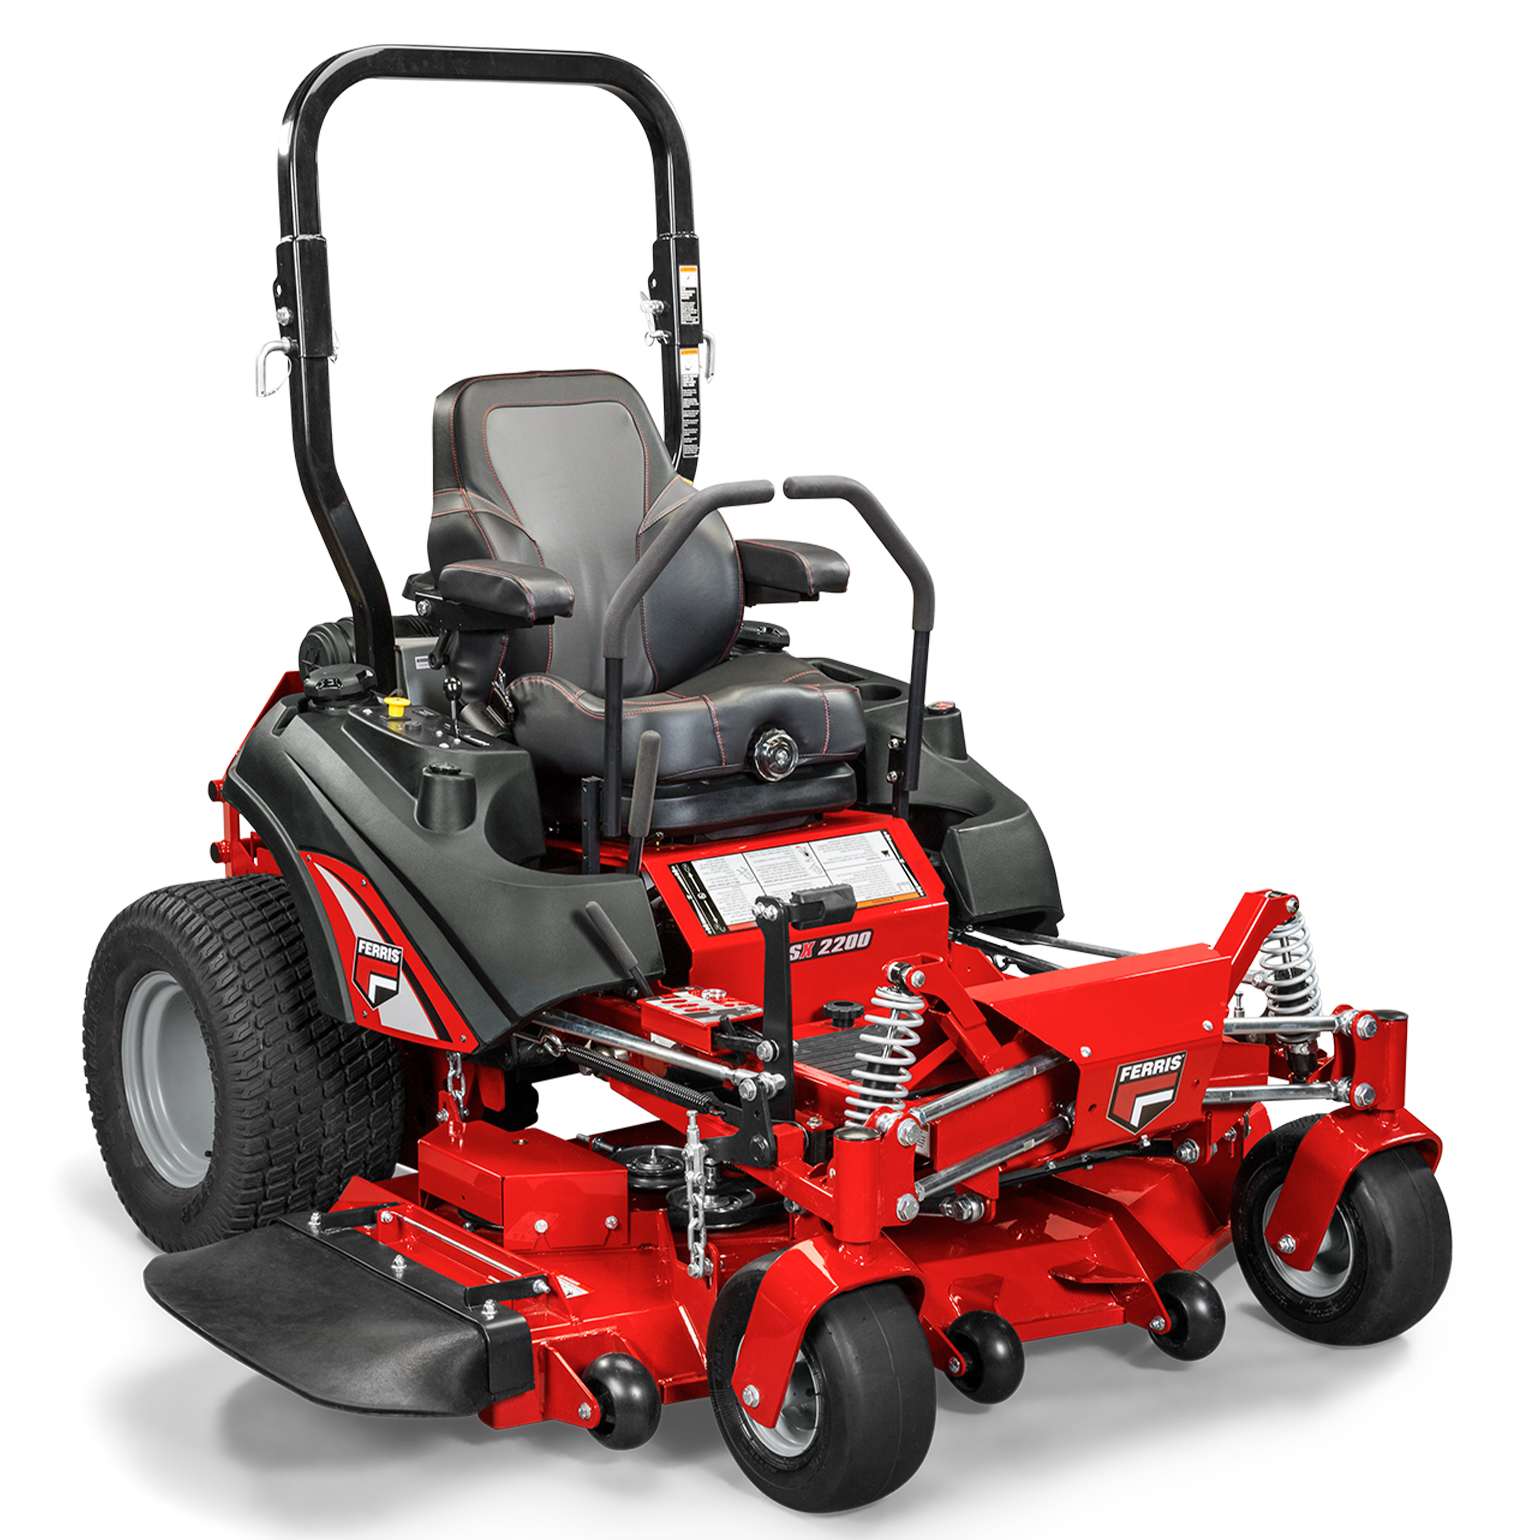 Ferris ISX2200 Riding Mower For Sale BPS